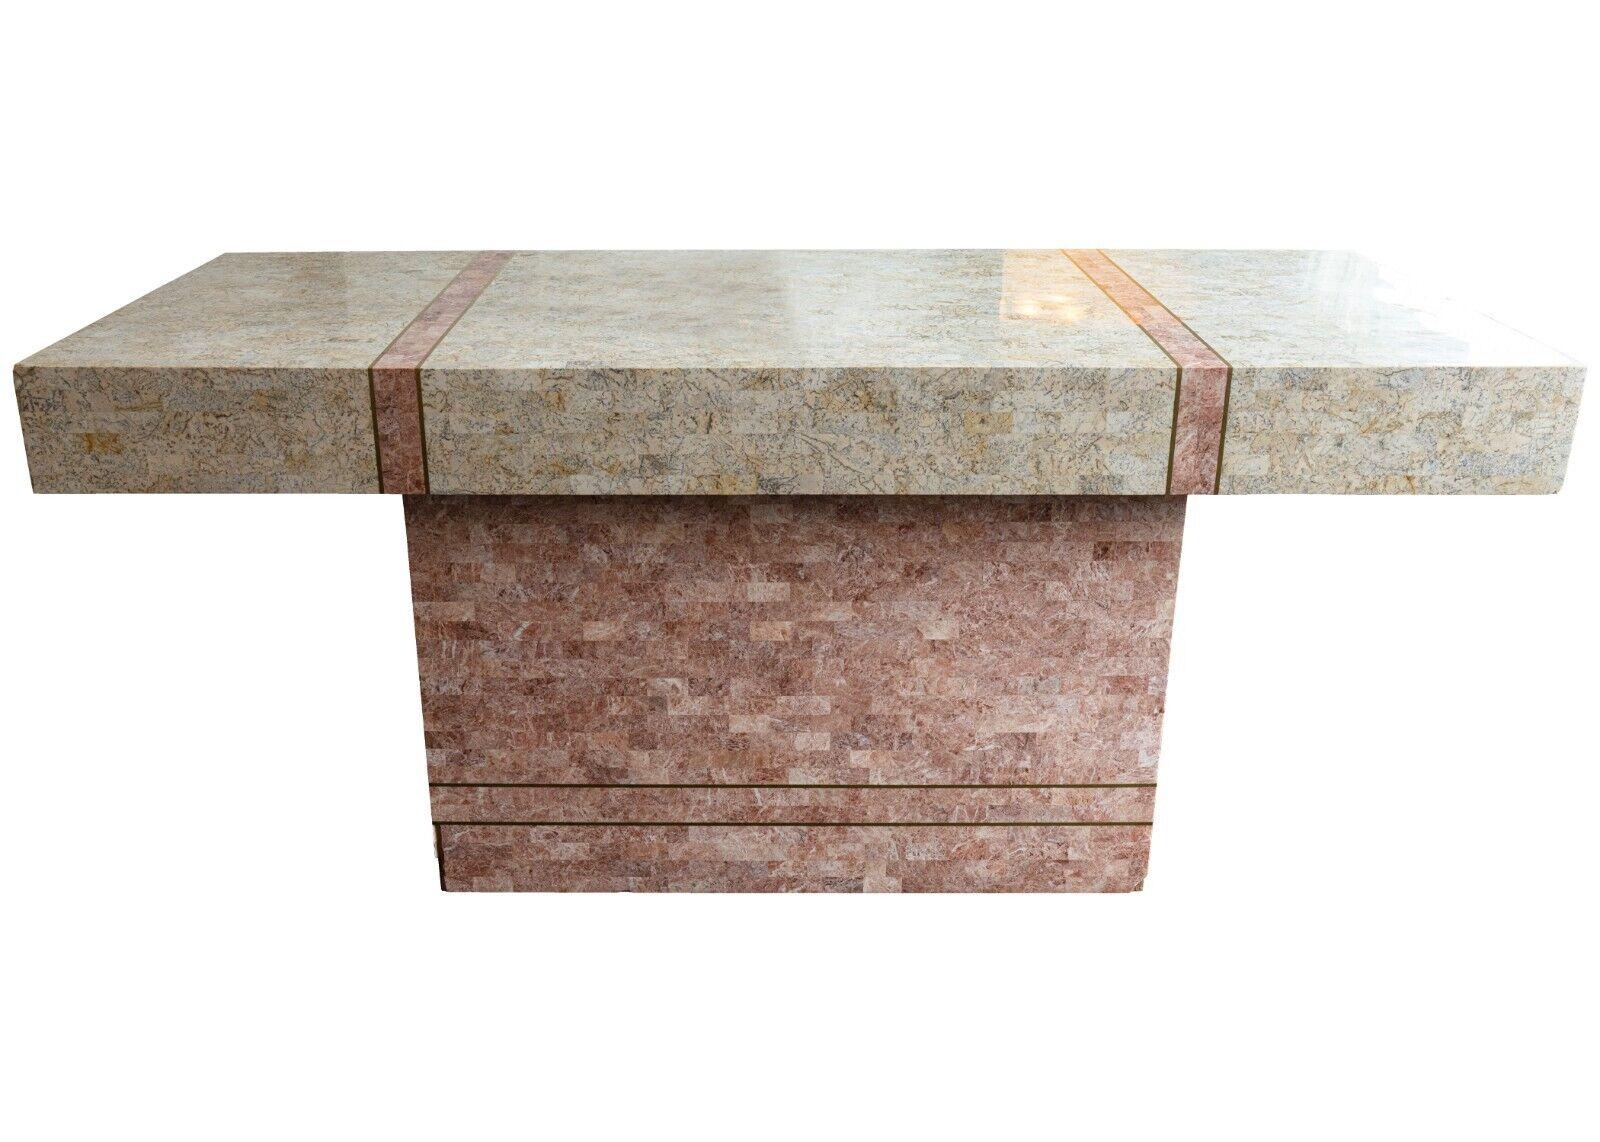 A 1970s Post Modern tessellated stone tile and brass executive desk by Robert Marcius for Maitland Smith. This marvelous piece is constructed with a hardwood inner frame surrounded by gorgeous pink tessellated stone tiles on the base, and white and